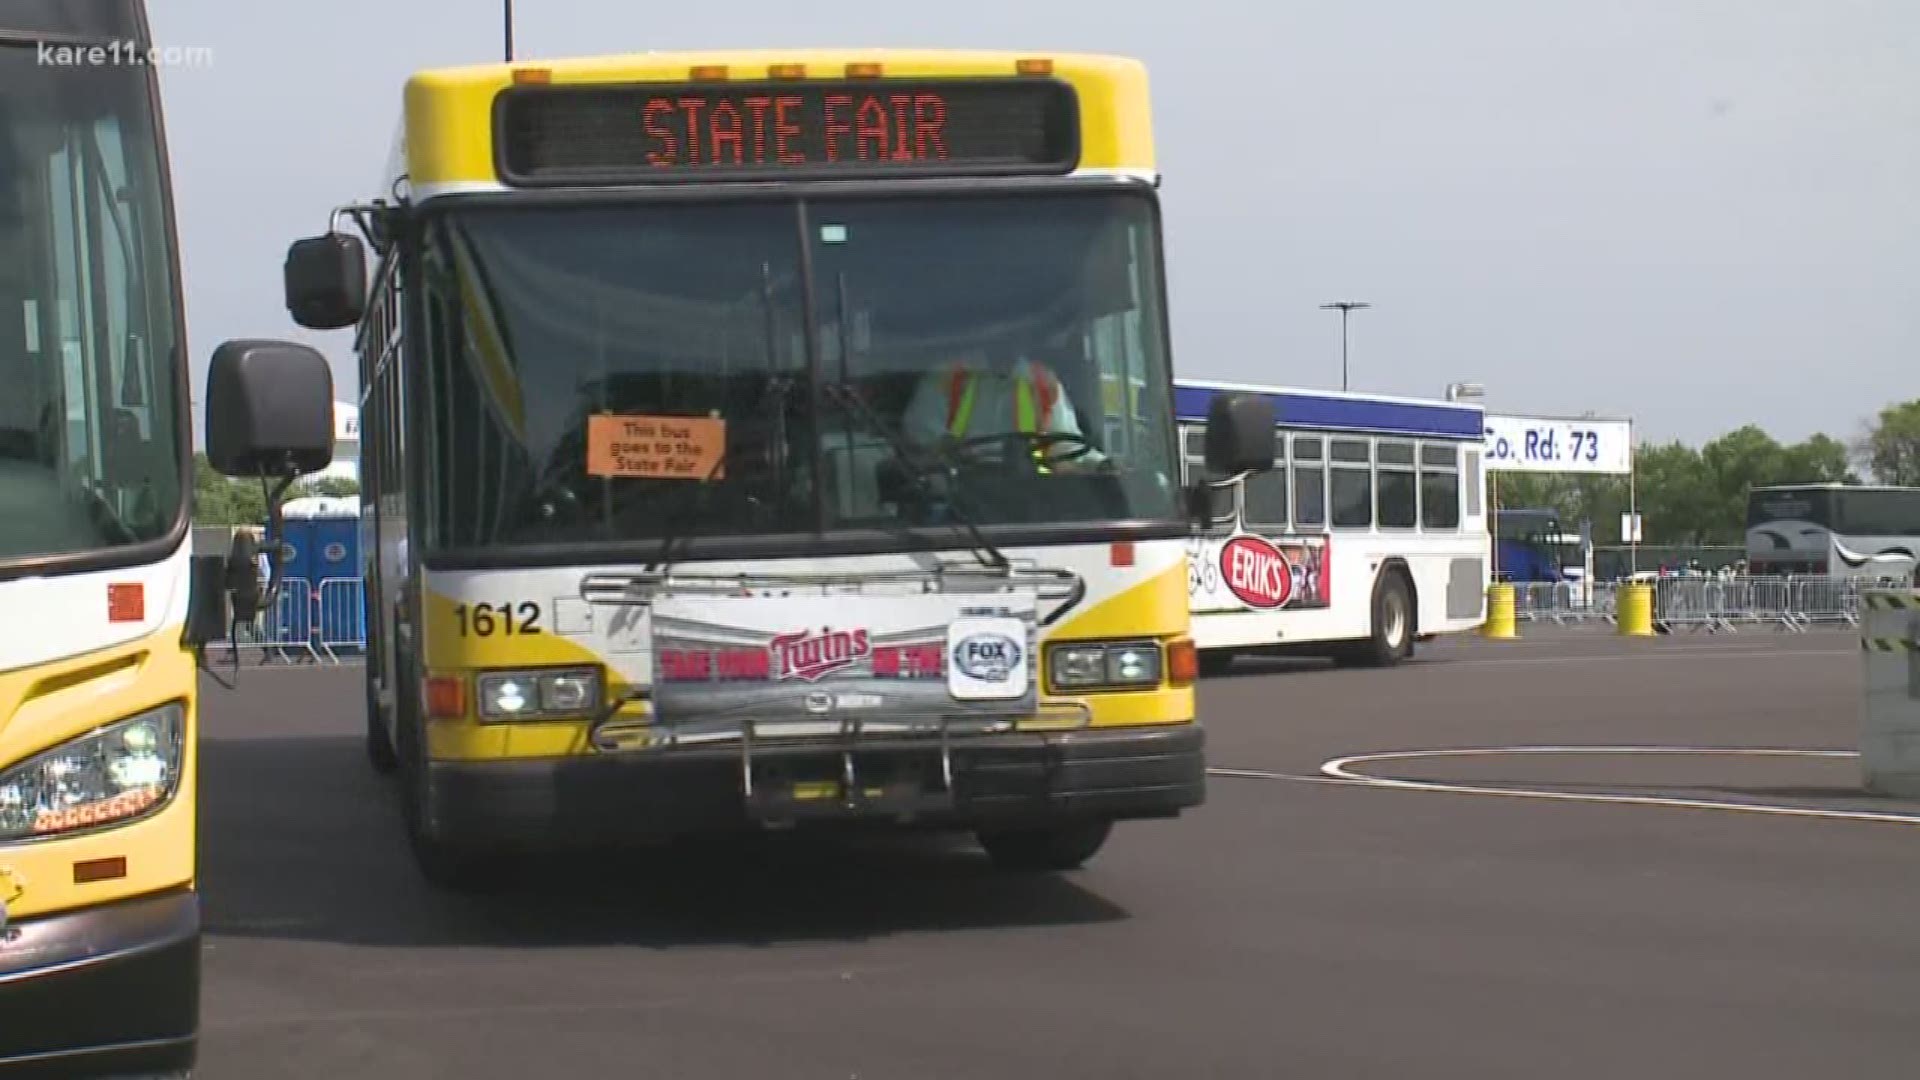 Some changes are coming to the State Fair public transportation options, due to the Metro Transit driver shortage. https://kare11.tv/2BvXrBW